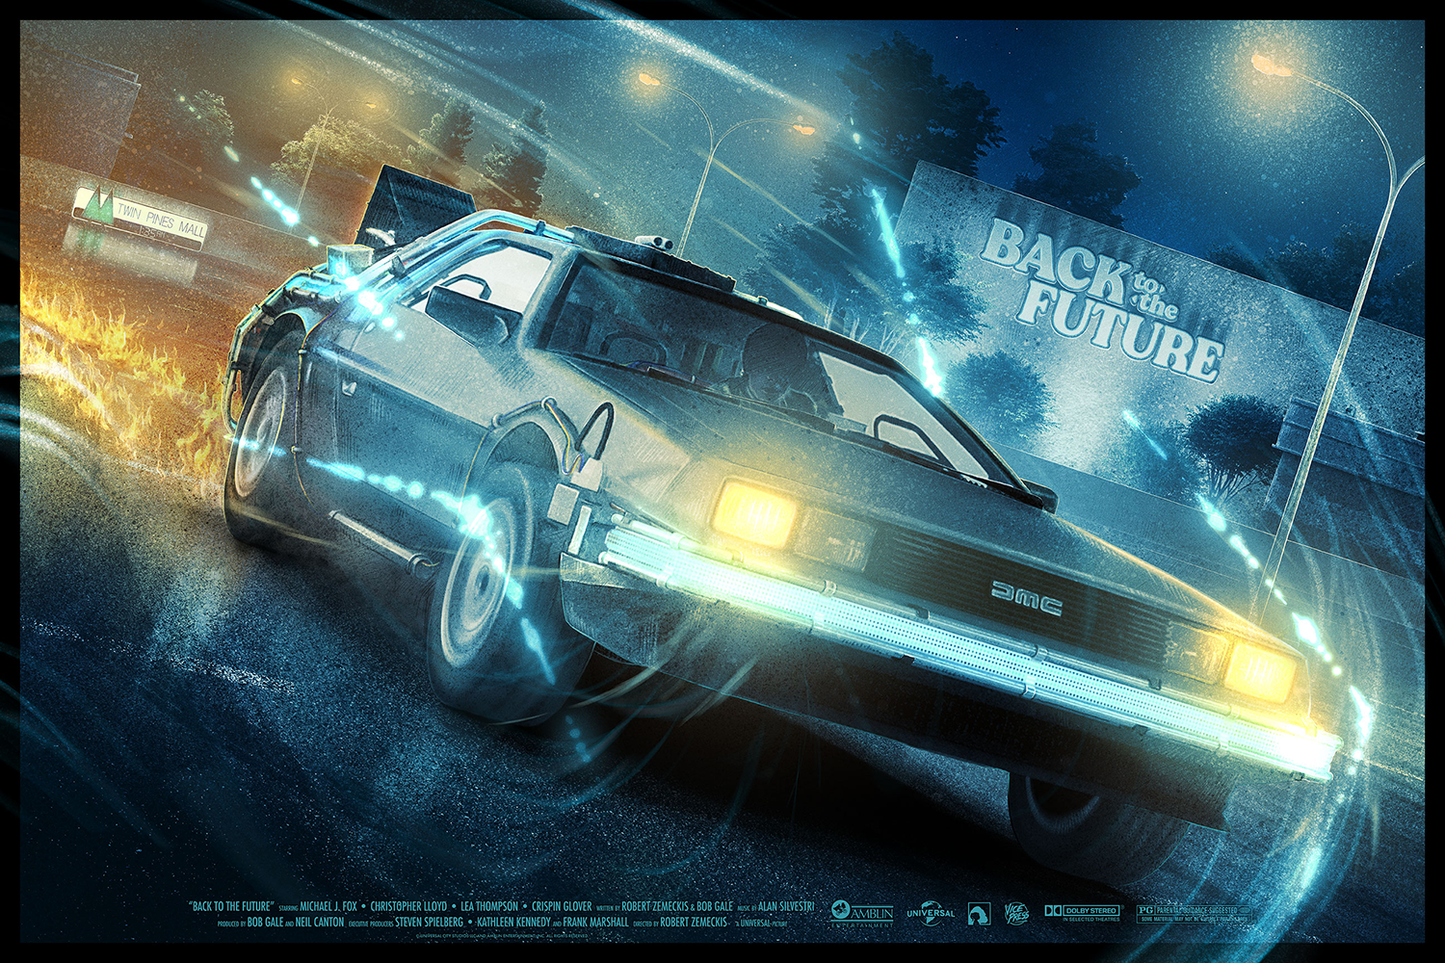 Kevin Wilson "Back to the Future"